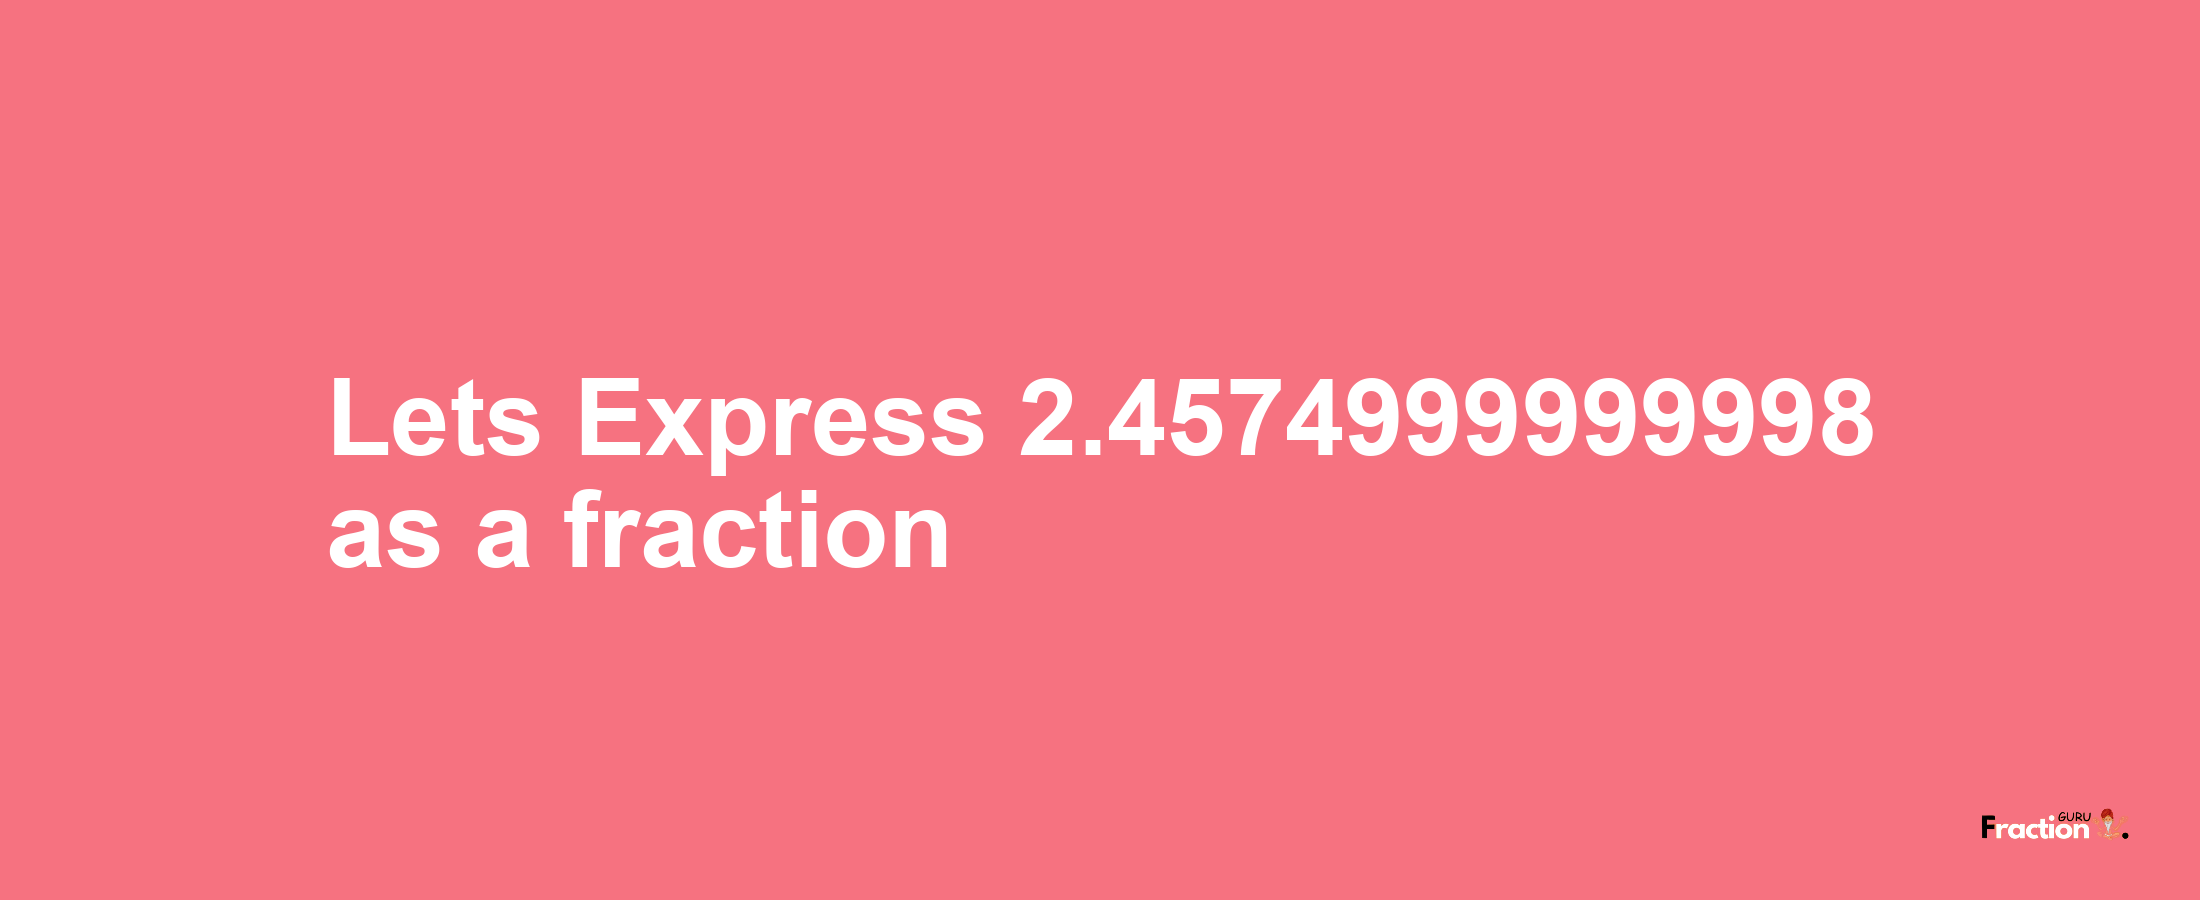 Lets Express 2.4574999999998 as afraction